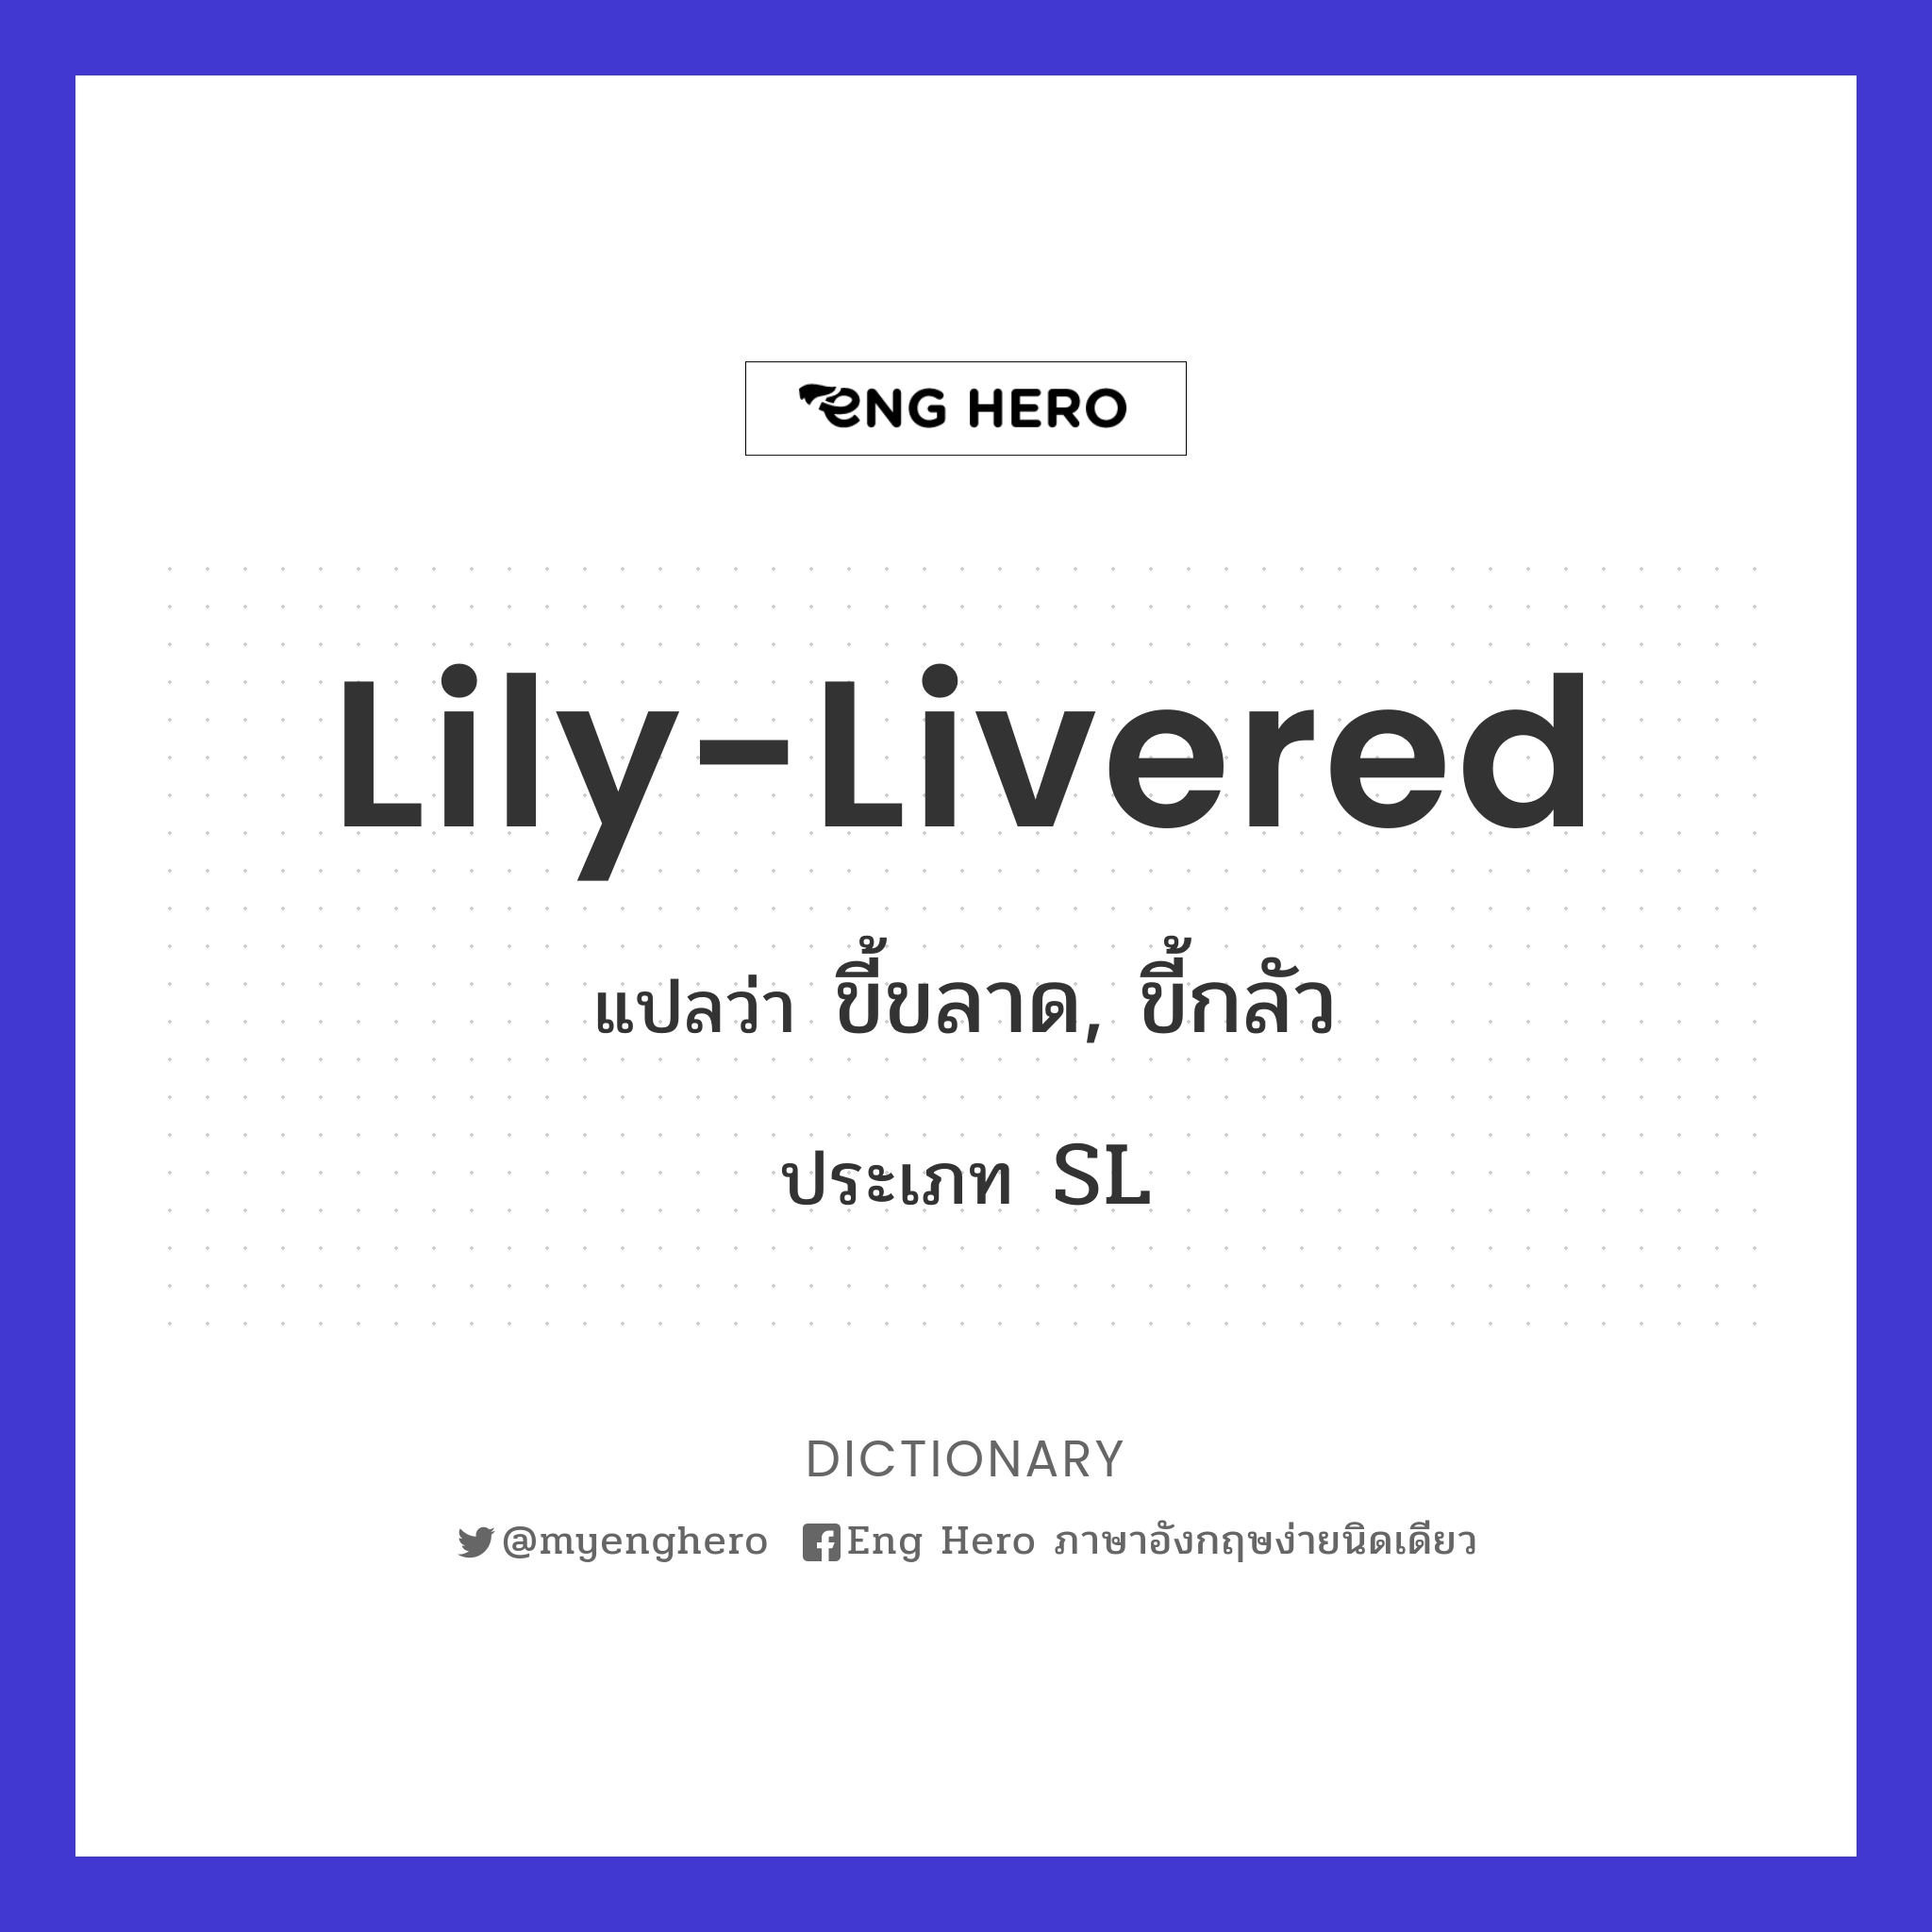 lily-livered